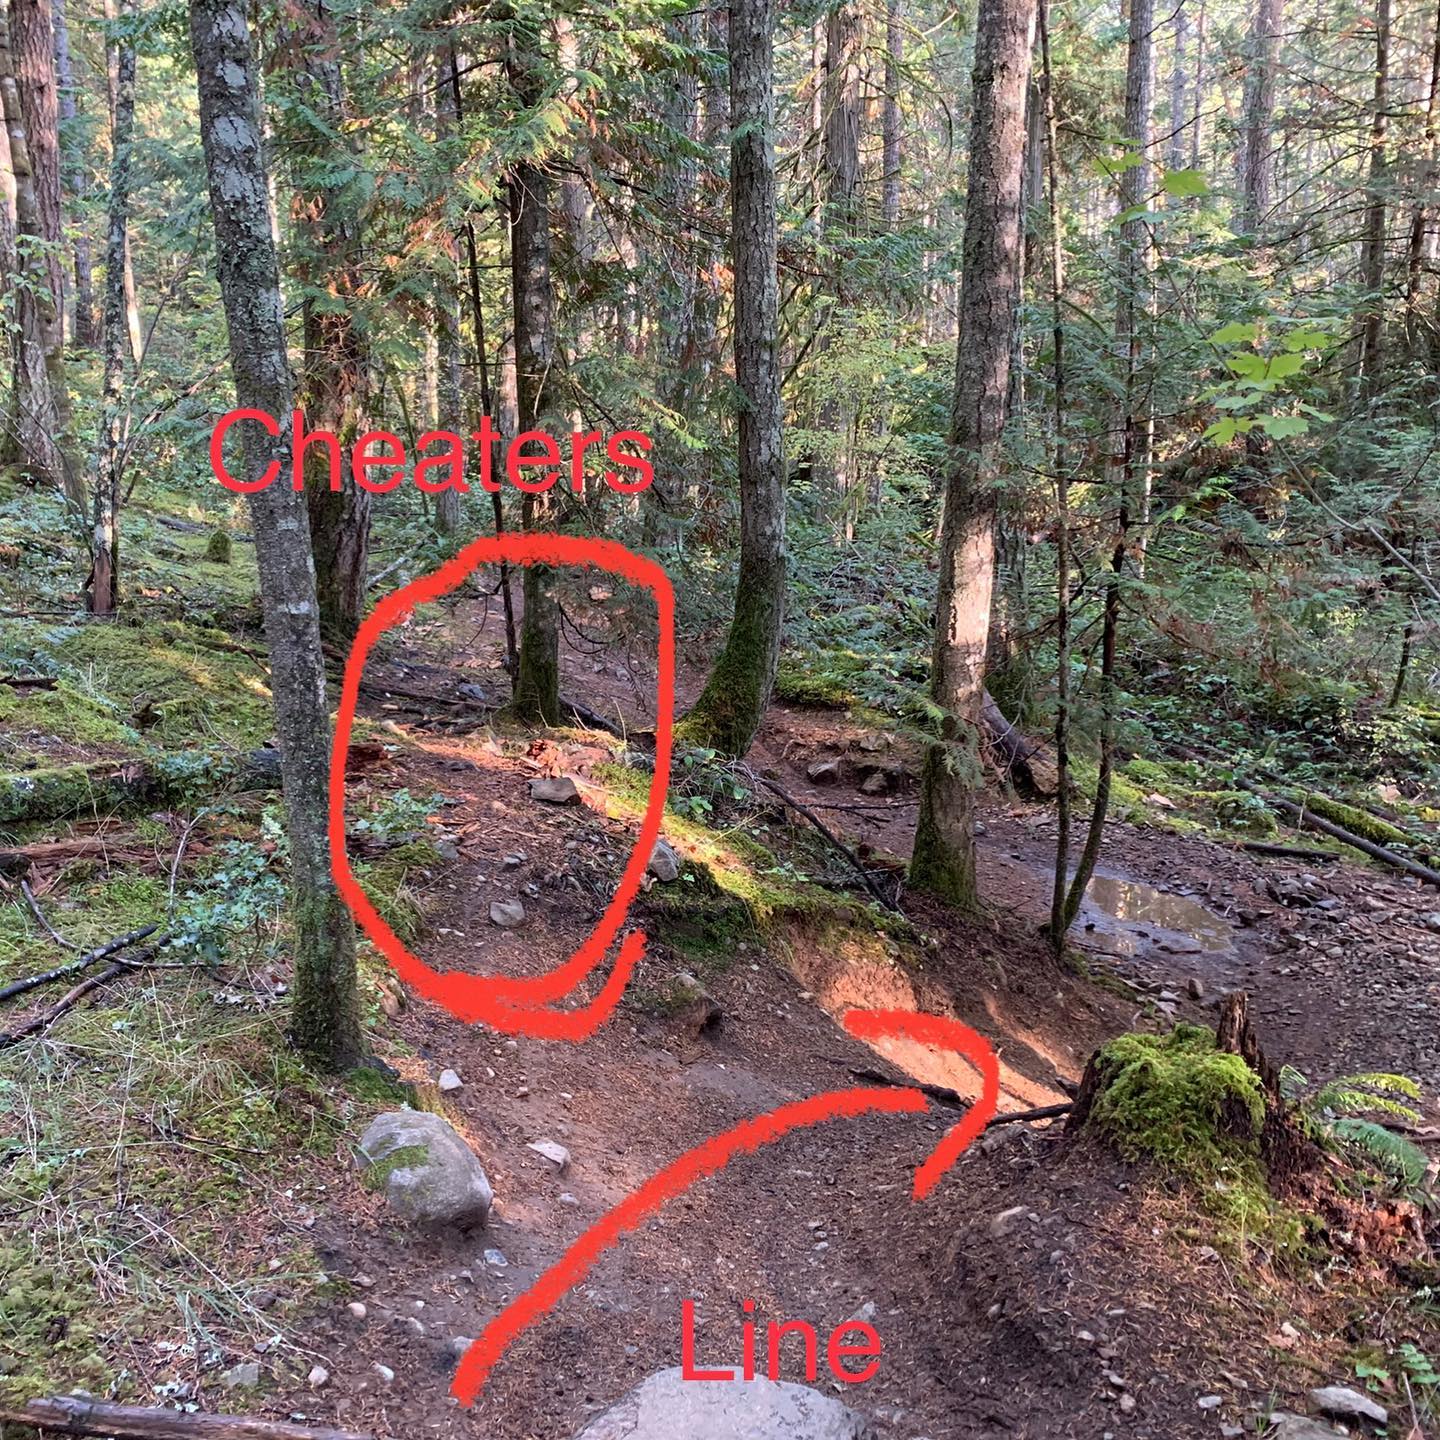 Hey mountain bikers of #heartland aka #thedump. Don’t take or create cheater lines. This little chicane on South Ridge is not hard, and really is fun. The straight line through the undergrowth is straight and lame. Don’t dumb down the trails and don’t create new braids. #mtbvi #yyj #mountainbiking #bikesarefun @southislandmountainbikesociety